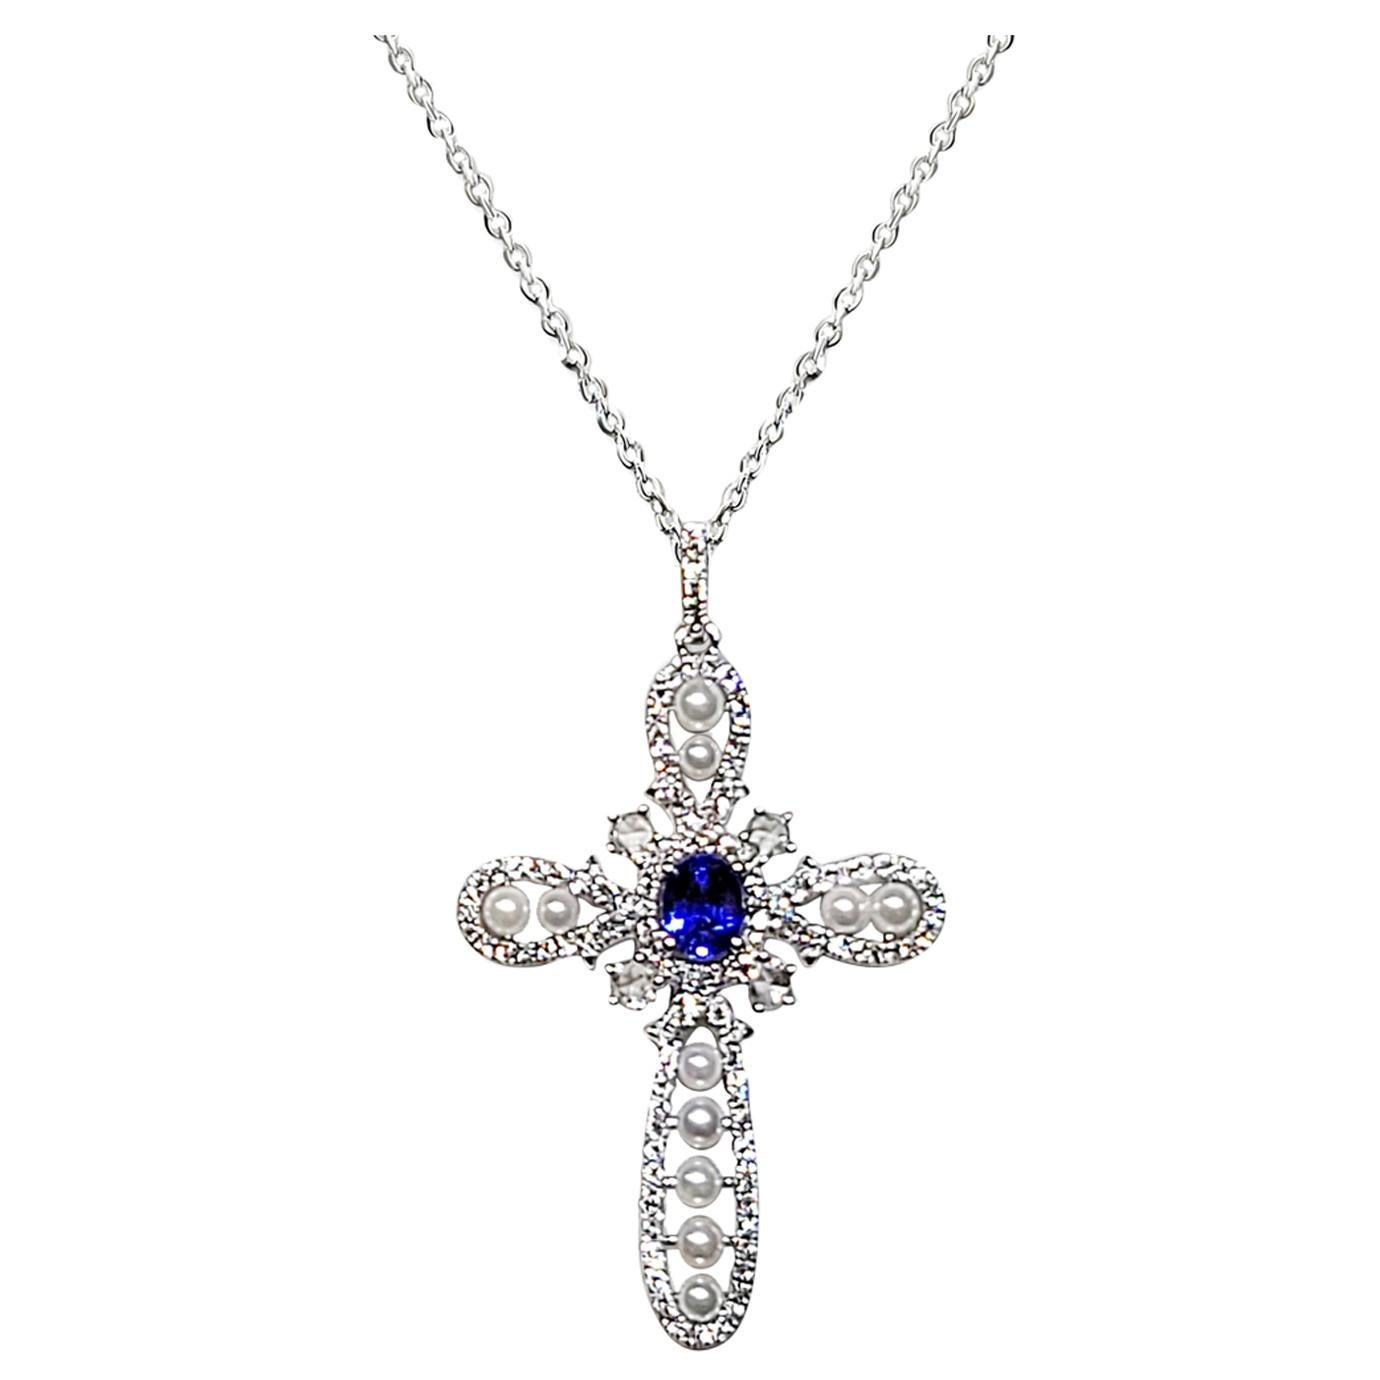 18 Karat White Gold 1.03 Carat Sapphire Pearl and Diamond Pendant with Chain For Sale